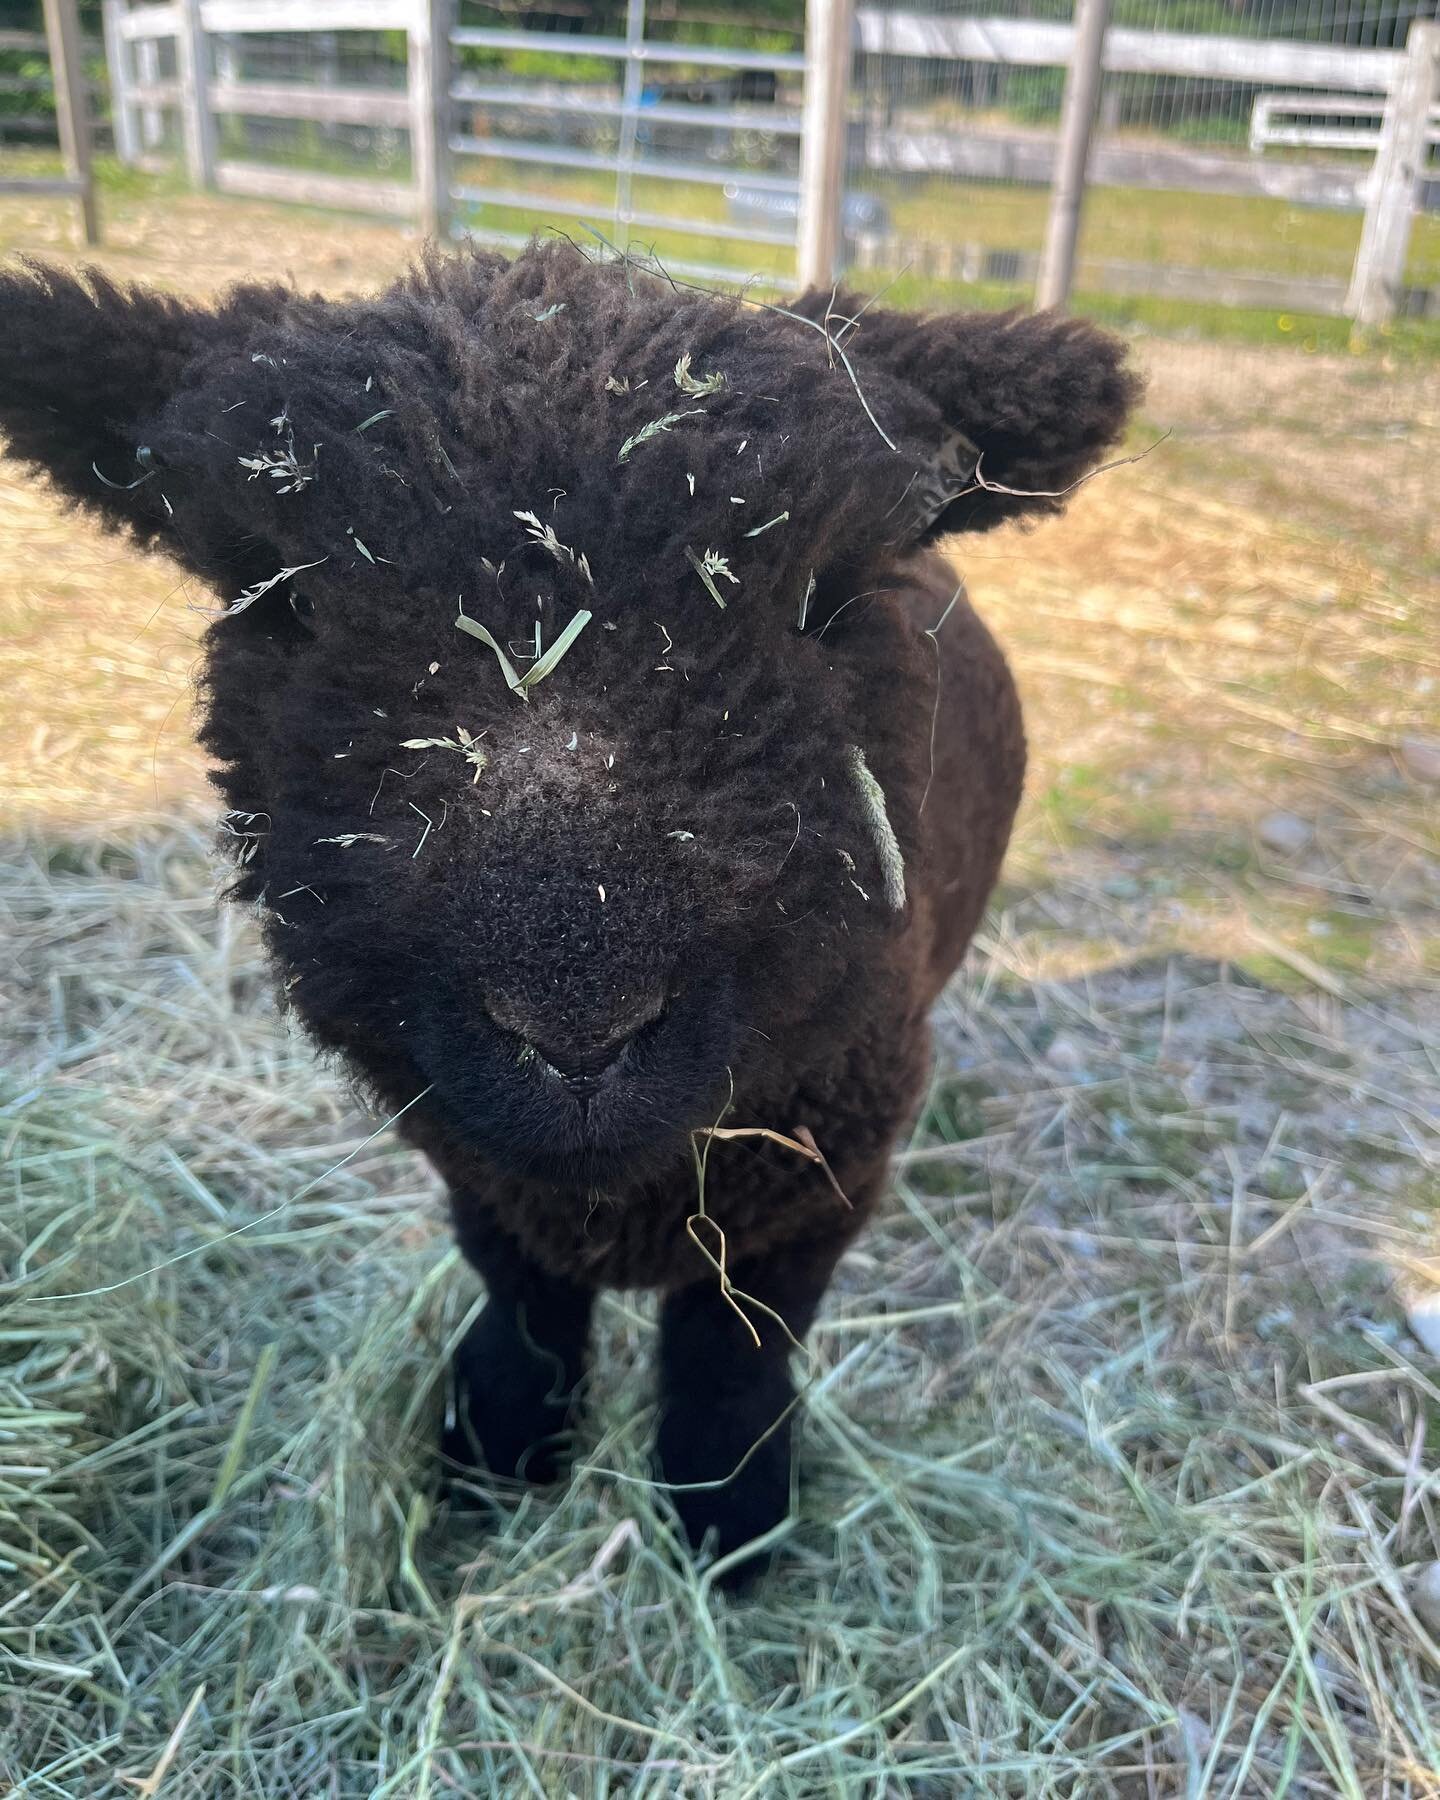 Little lamb, Penn, wearing his supper on his face! These guys, lambs Penn and Teller and kids, Starsky and Hutch, make me smile and laugh every day!  #farmingjoy! #atcobblestonefarm  #southdownbabydoll  #southdownbabydollsheep